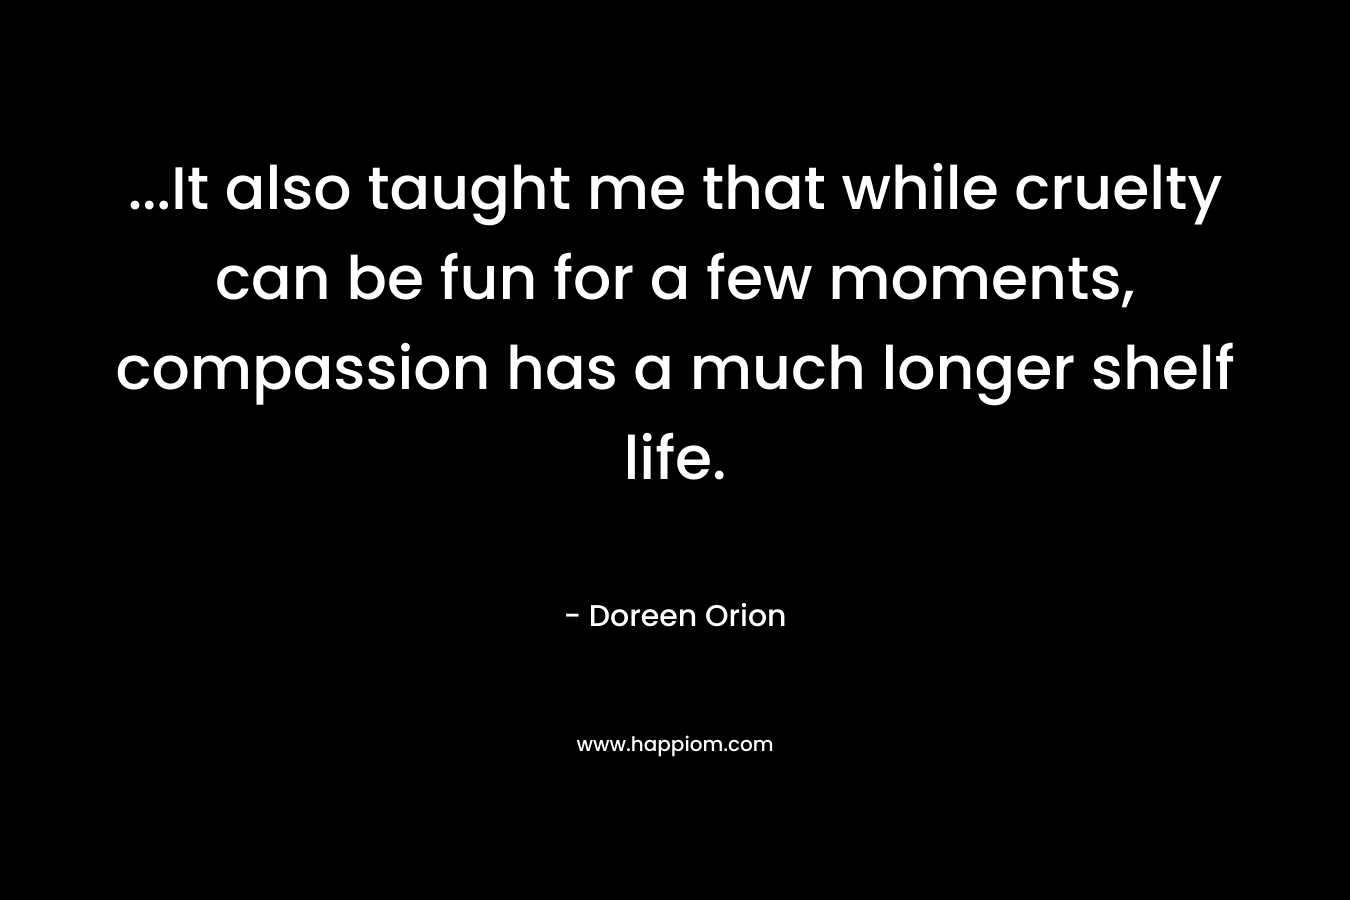 ...It also taught me that while cruelty can be fun for a few moments, compassion has a much longer shelf life.